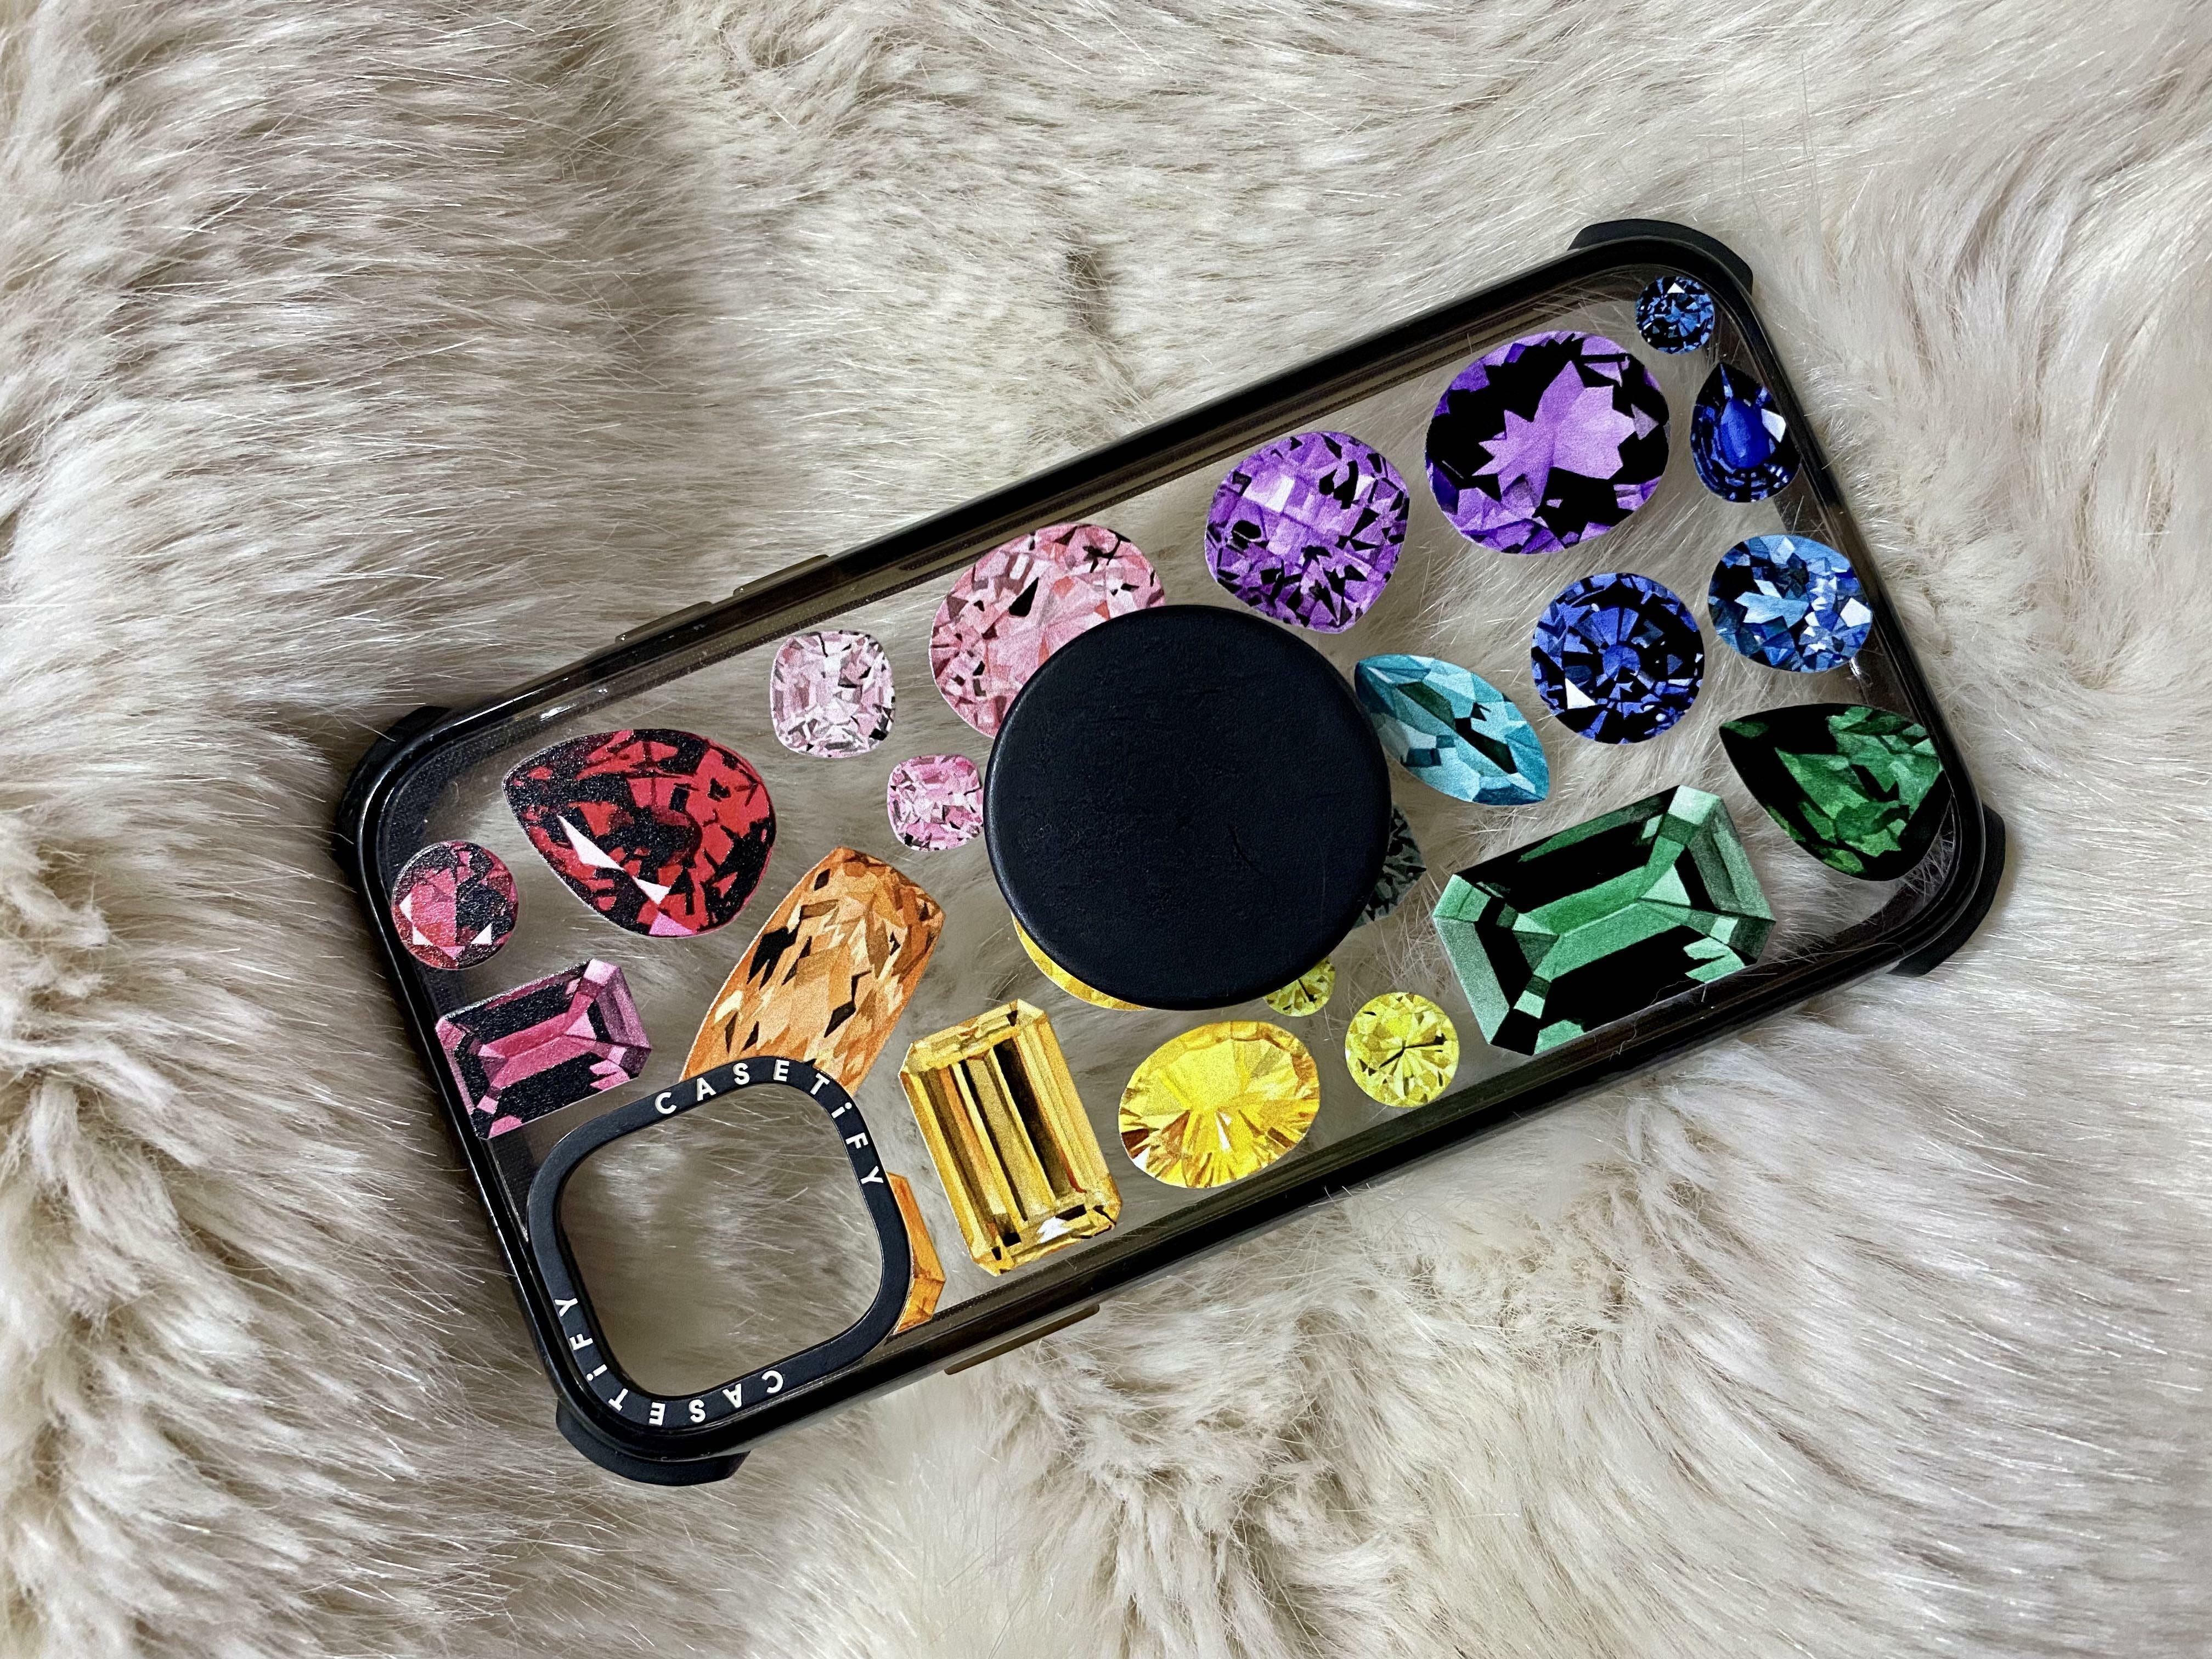 How To Remove Popsocket From Phone Case 1689653166 